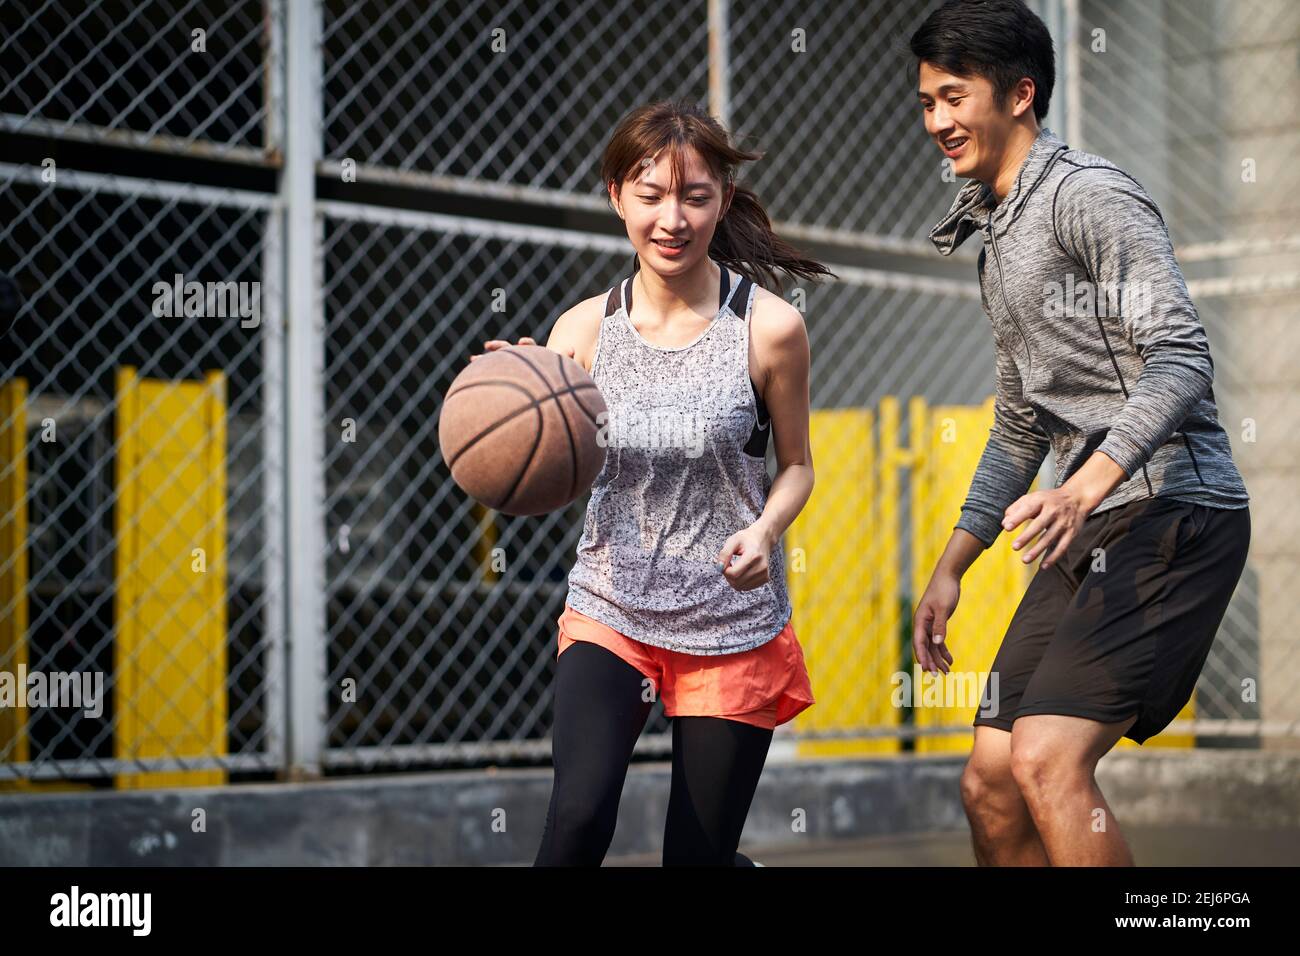 young asian couple boyfriend girlfriend playing basketball for fun on outdoor court Stock Photo